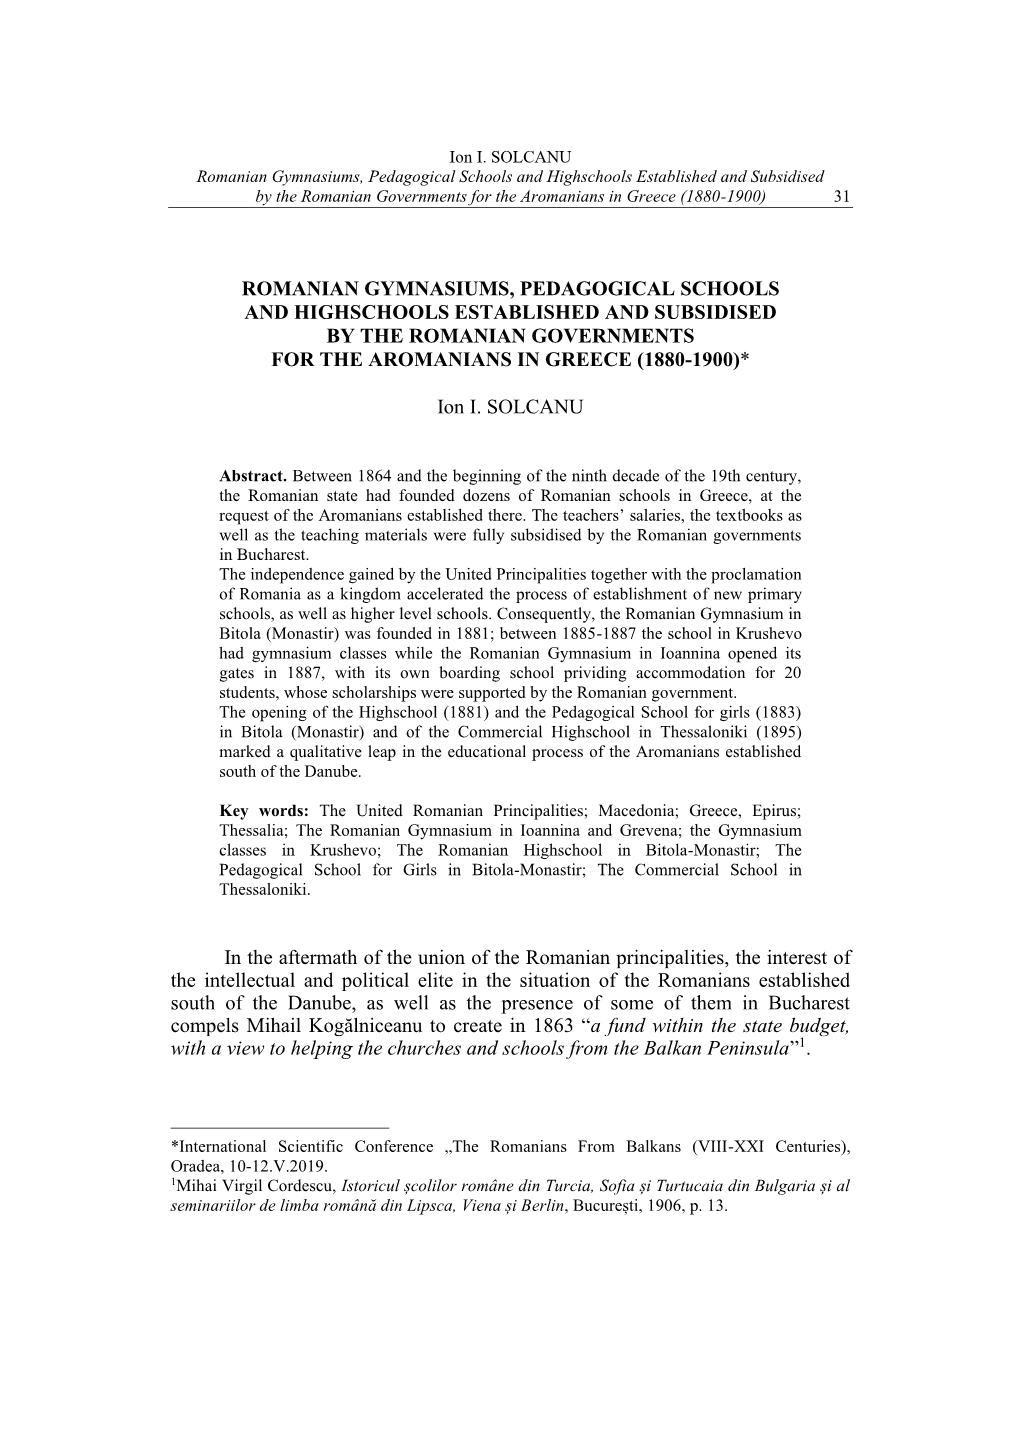 Romanian Gymnasiums, Pedagogical Schools and Highschools Established and Subsidised by the Romanian Governments for the Aromanians in Greece (1880-1900) 31